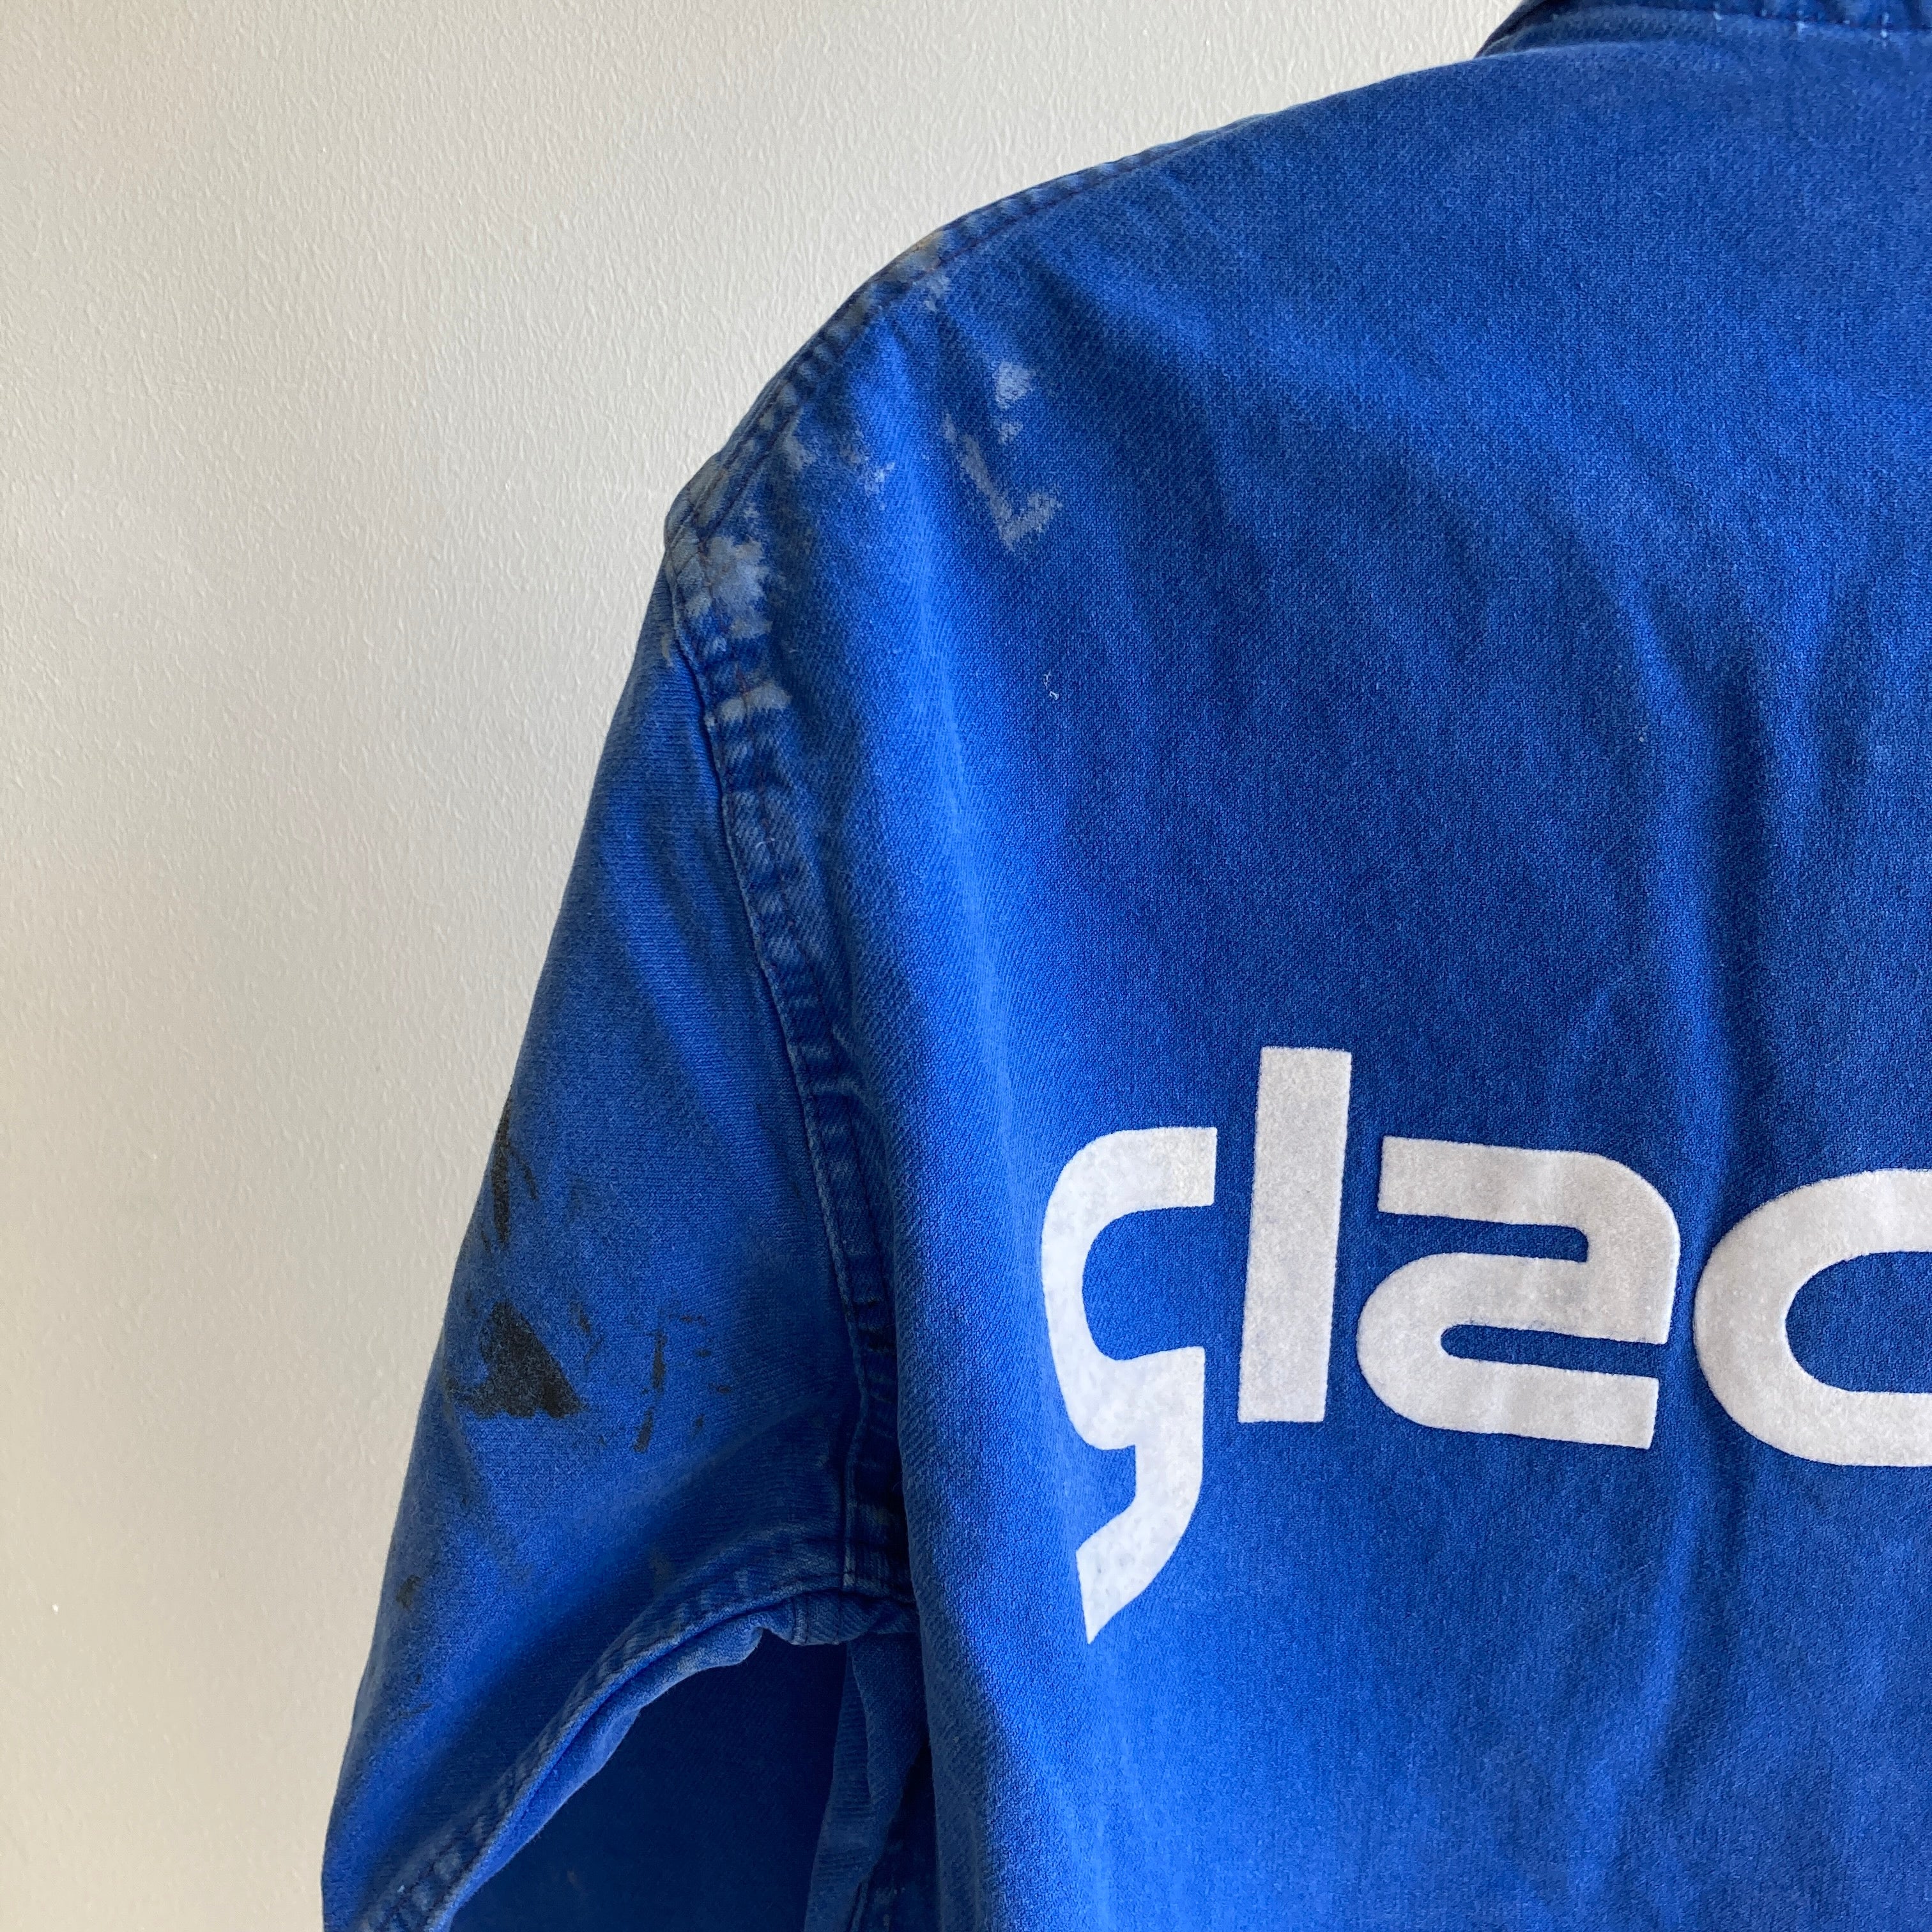 1980s Glacisol European Chore Coat - Stained and Mended